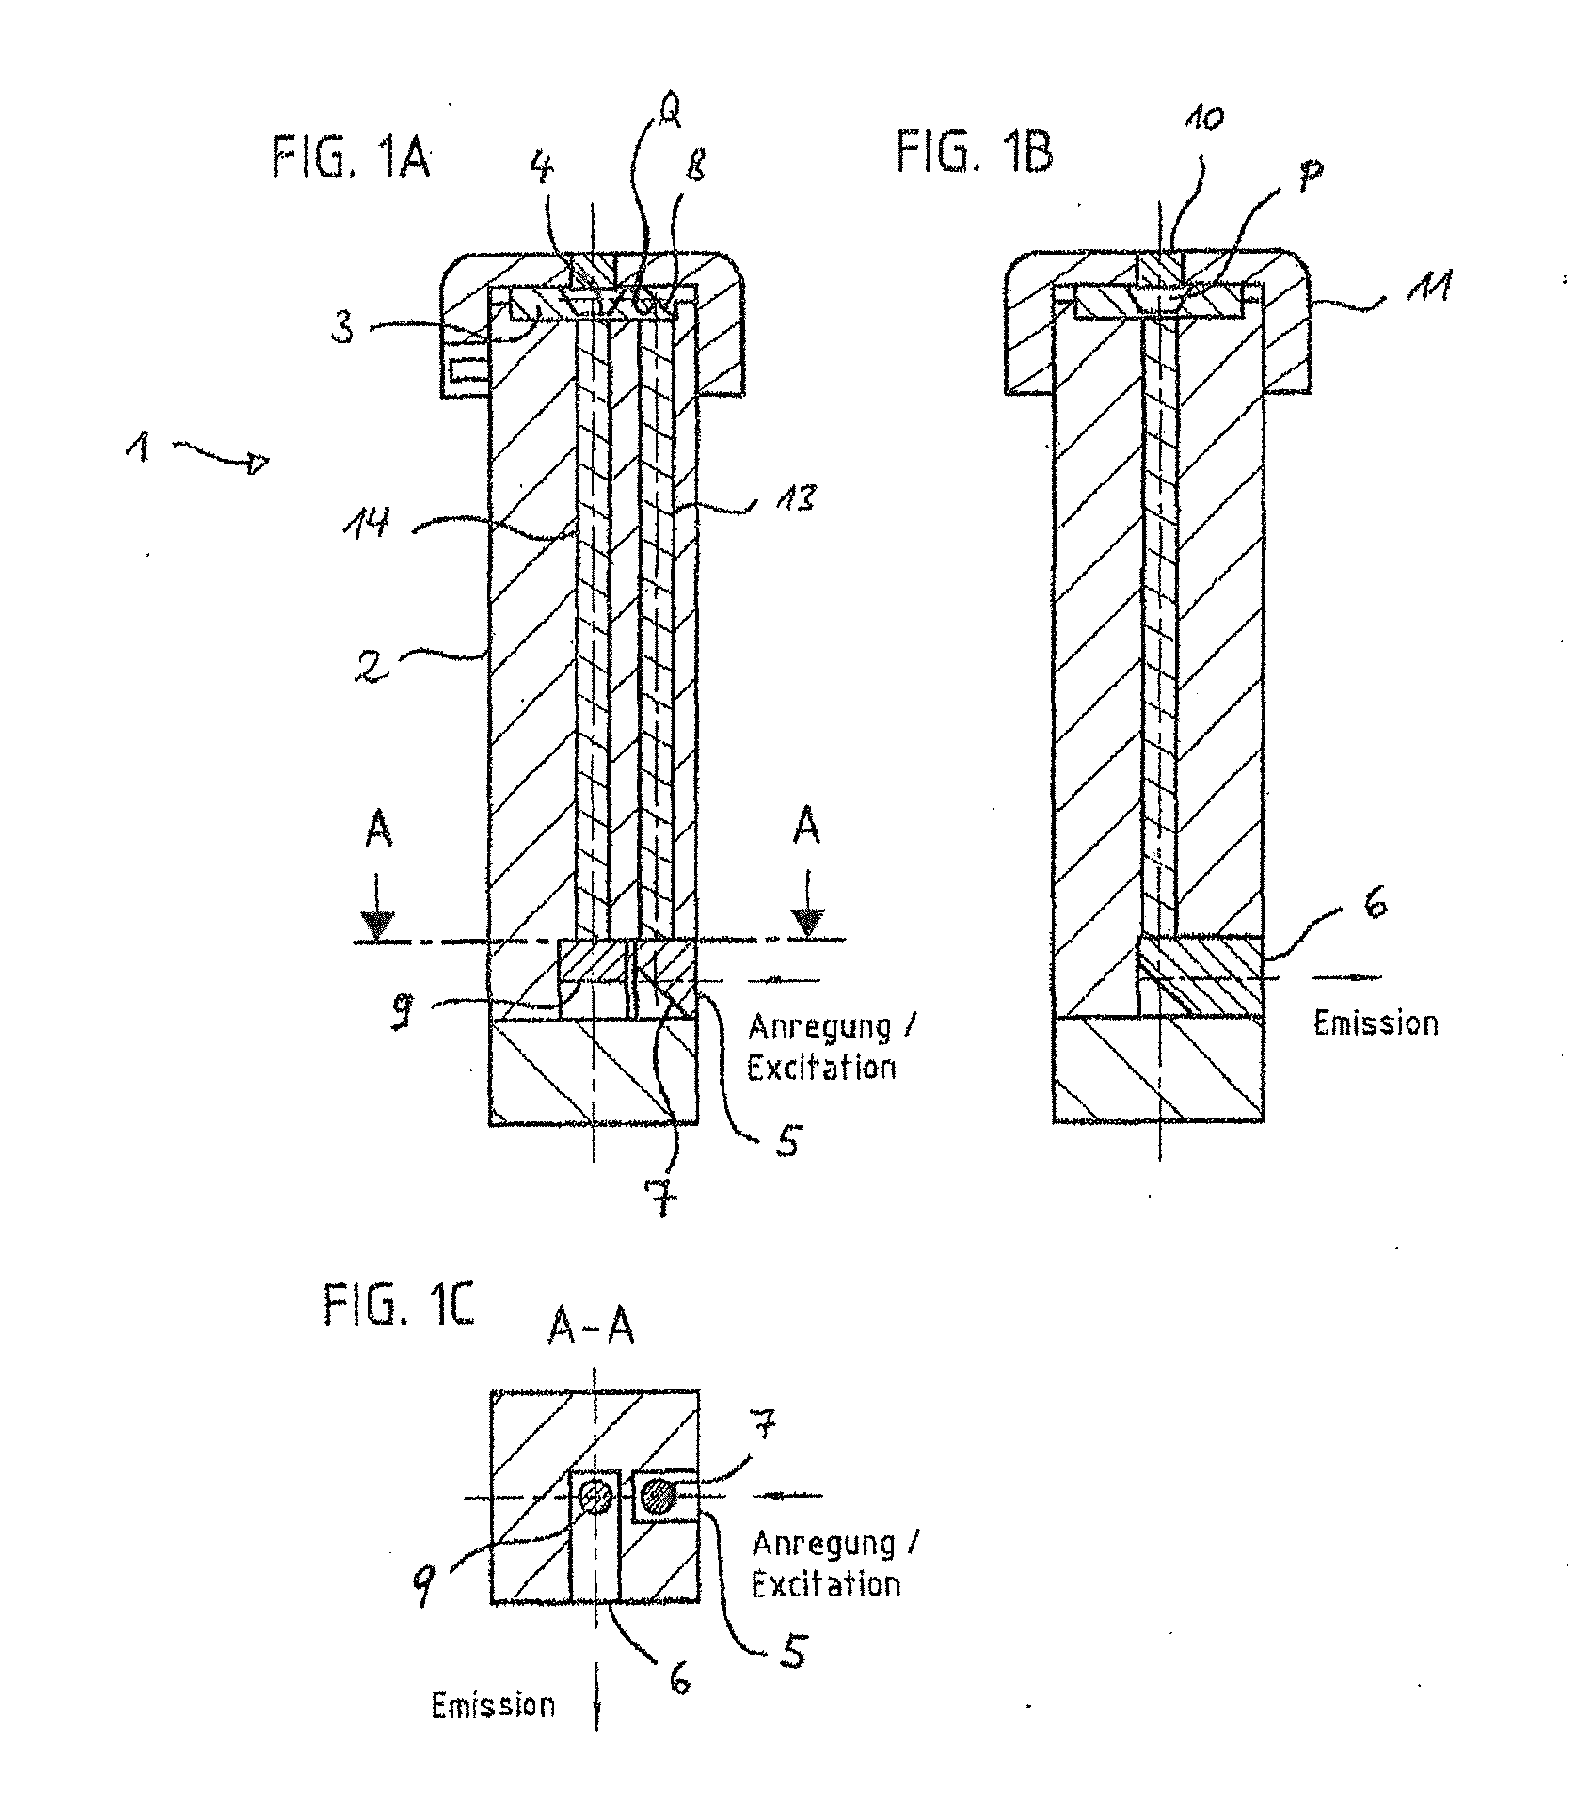 Apparatus for analysing a small amount of liquid